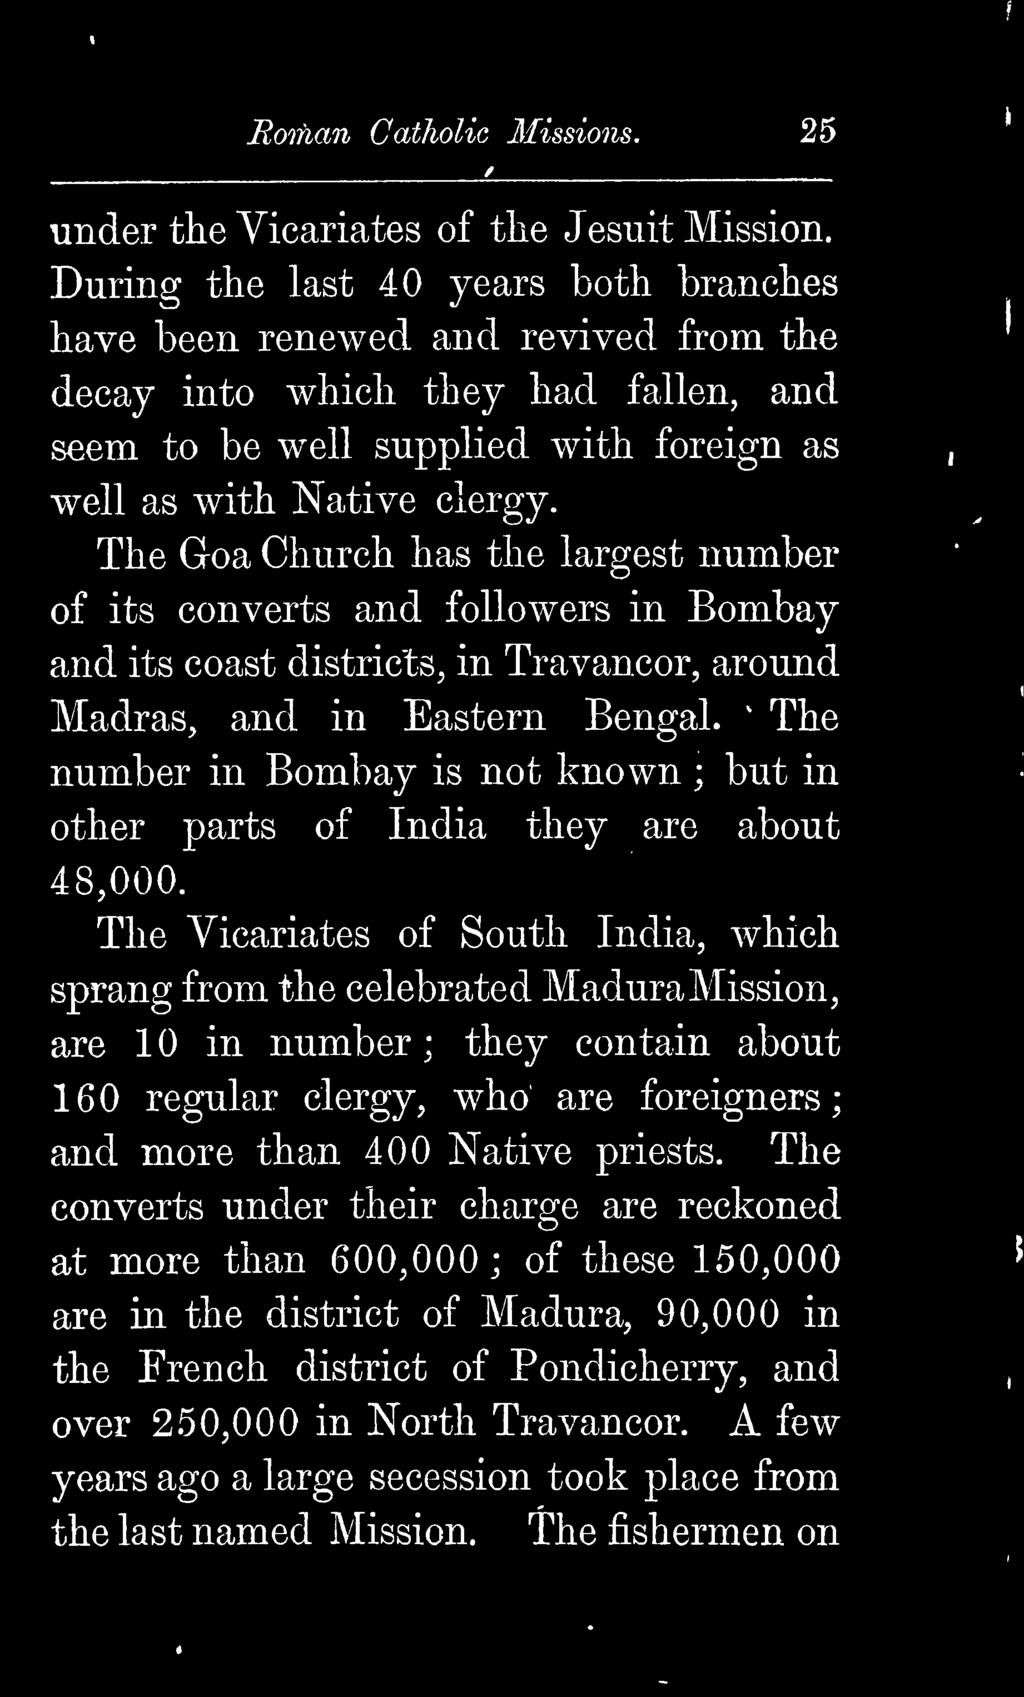 The Goa Church has the largest number of its converts and followers in Bombay and its coast districts, in Travancor, around Madras, and in Eastern Bengal.